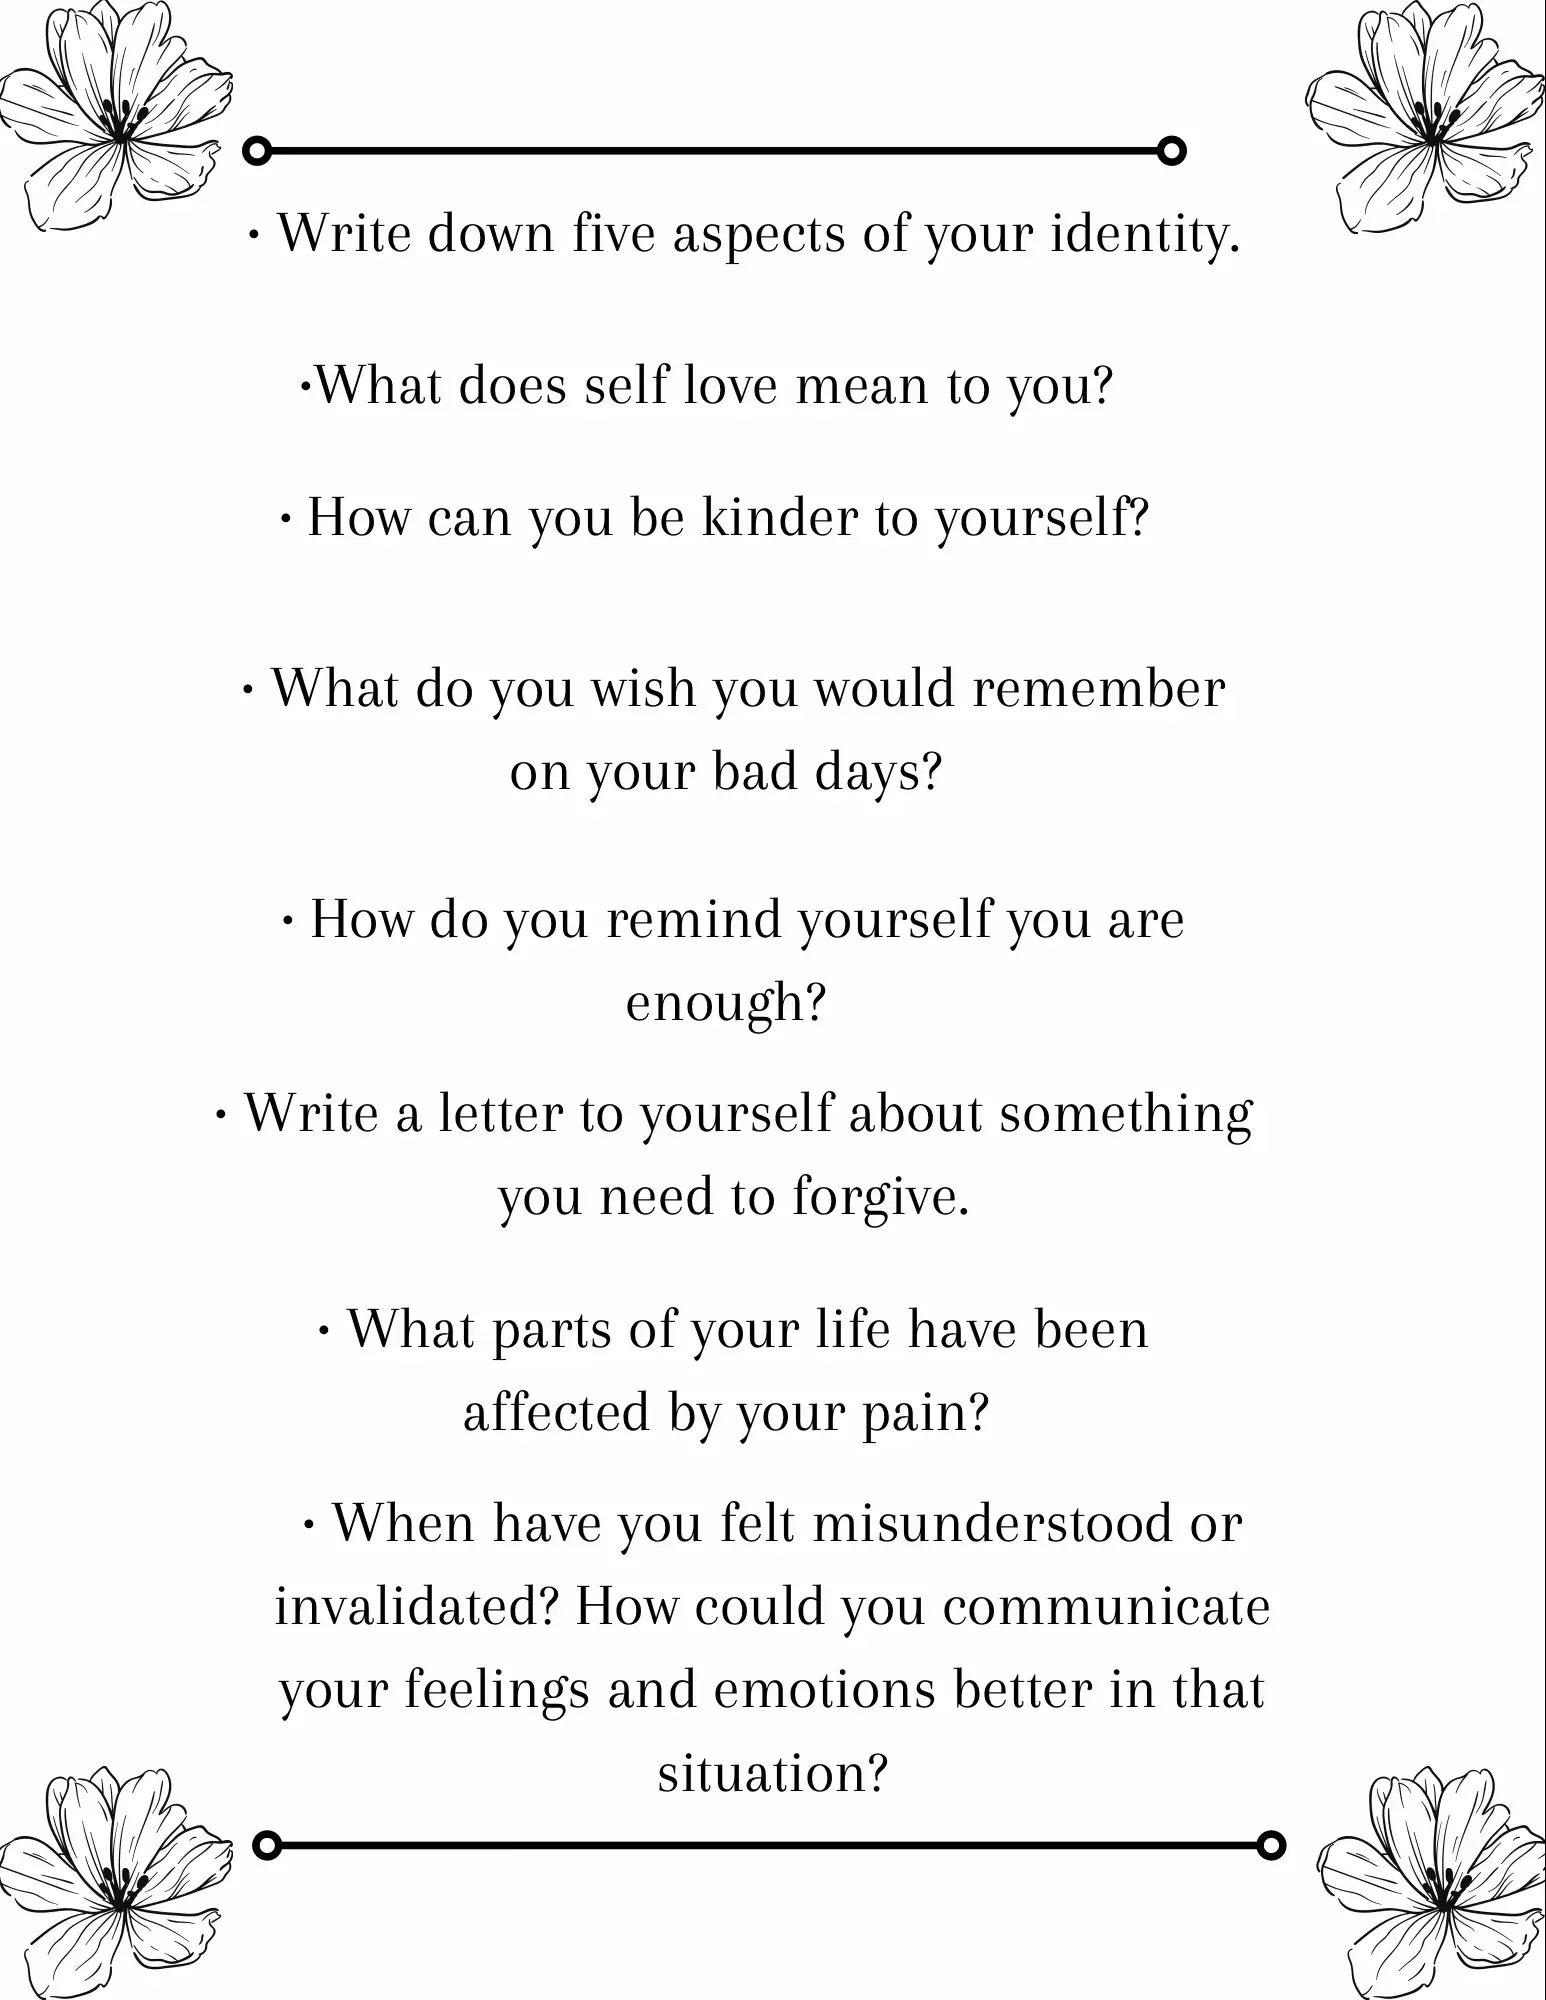 Journal Prompts for Reflecting on Relationships 💕